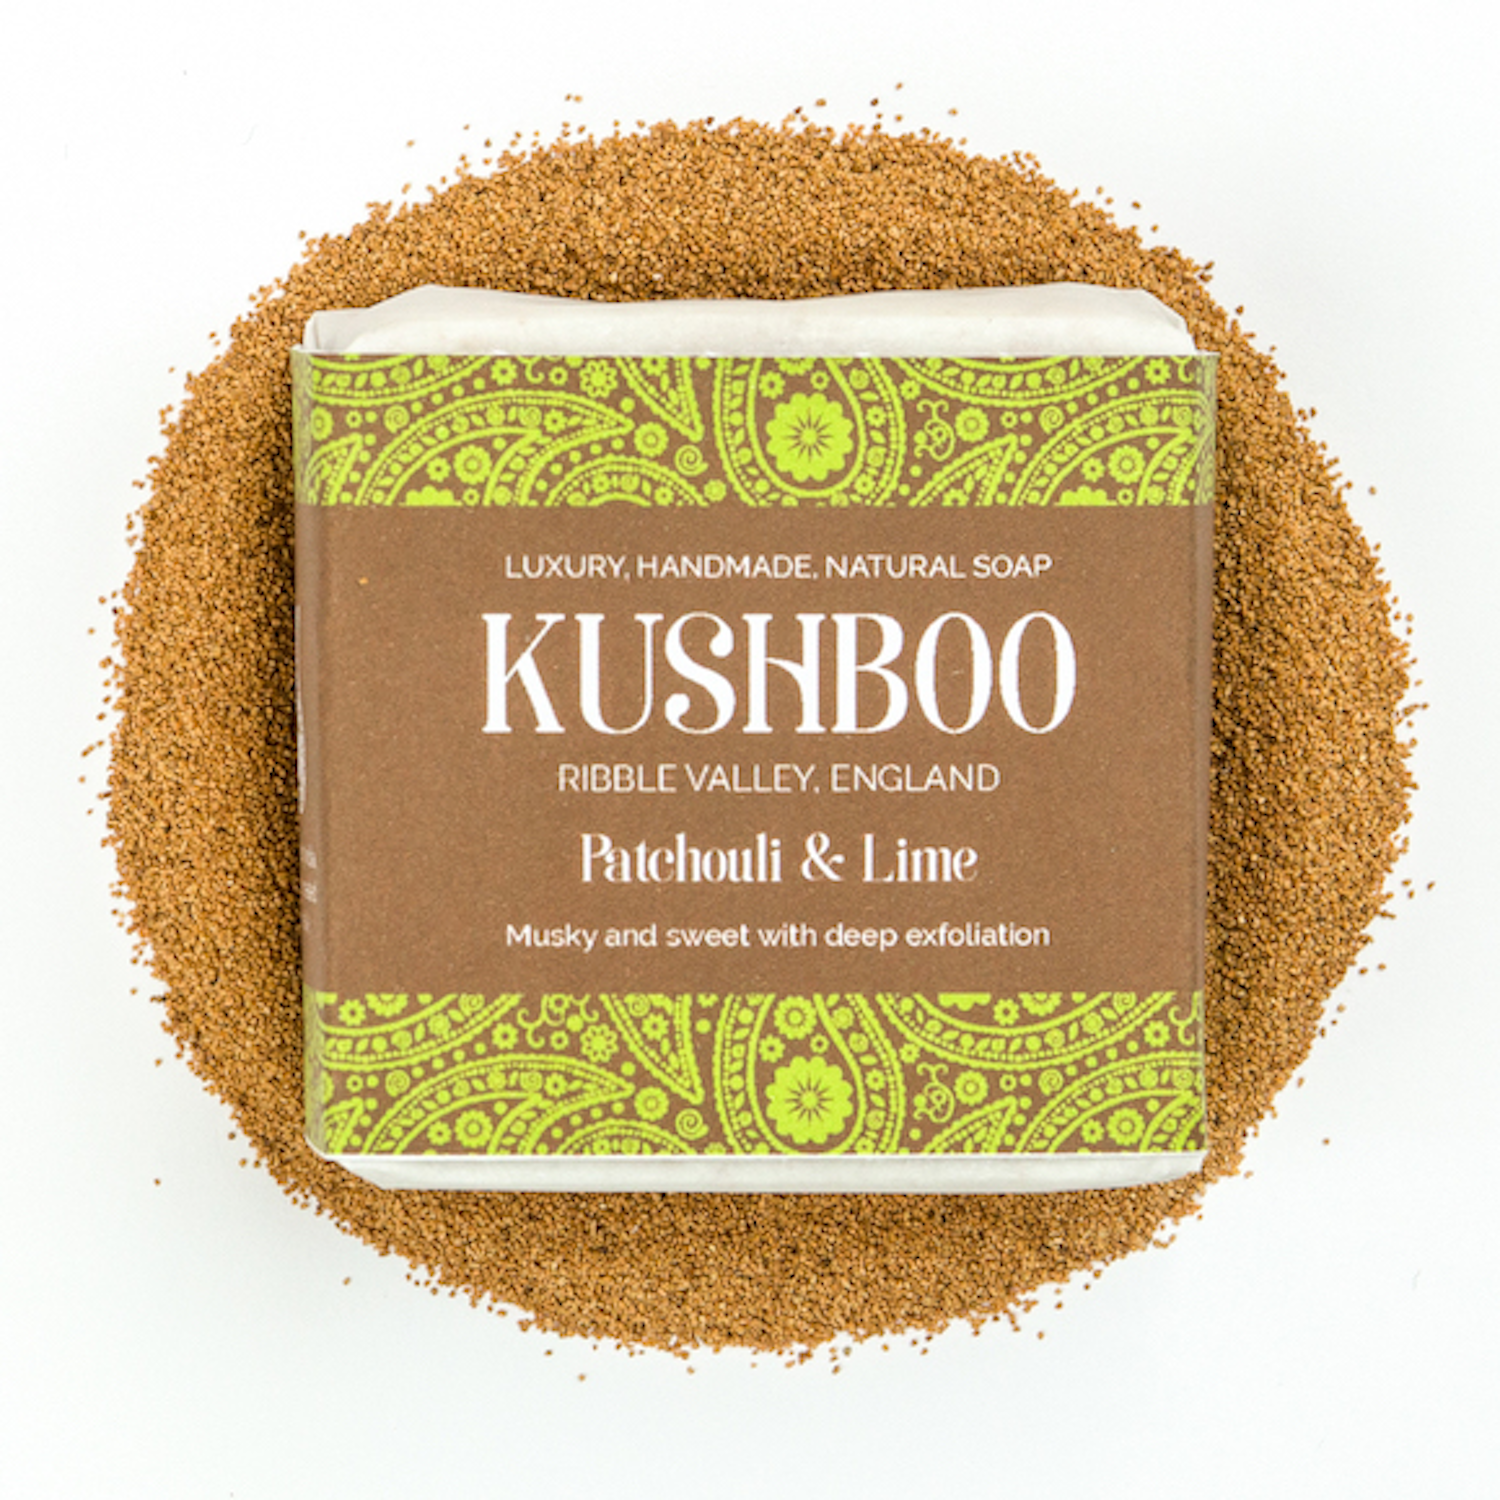 Kushboo Patchouli and Lime Soap